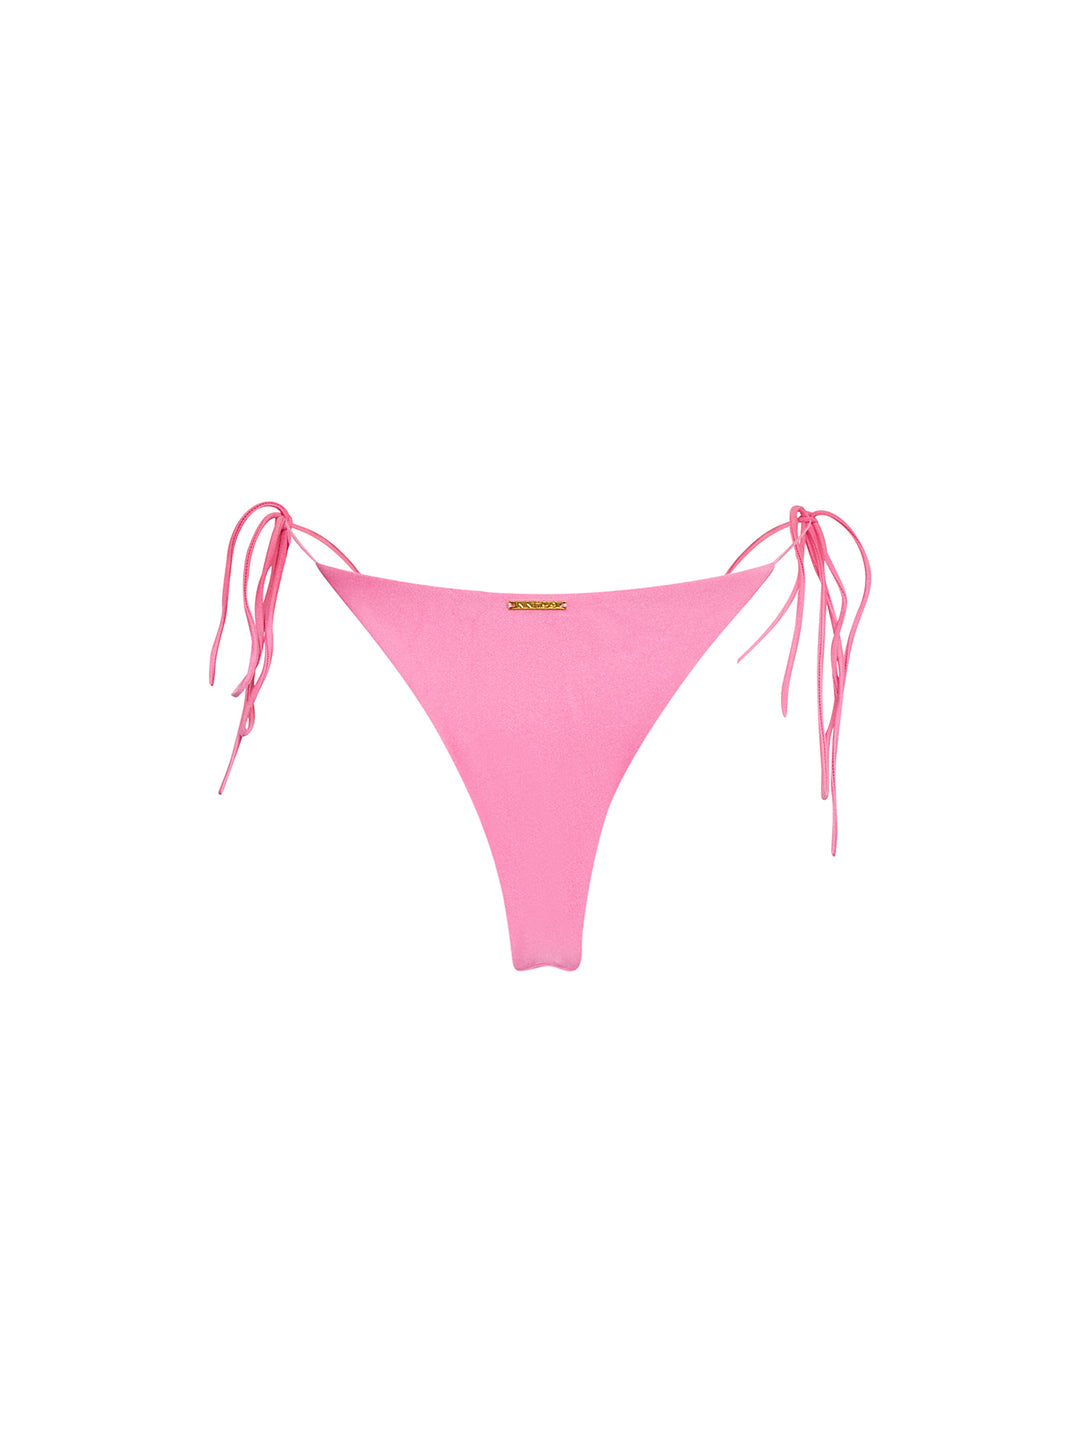 DAYDREAM - Reversible Cheeky Bottom • Pink Watercolor